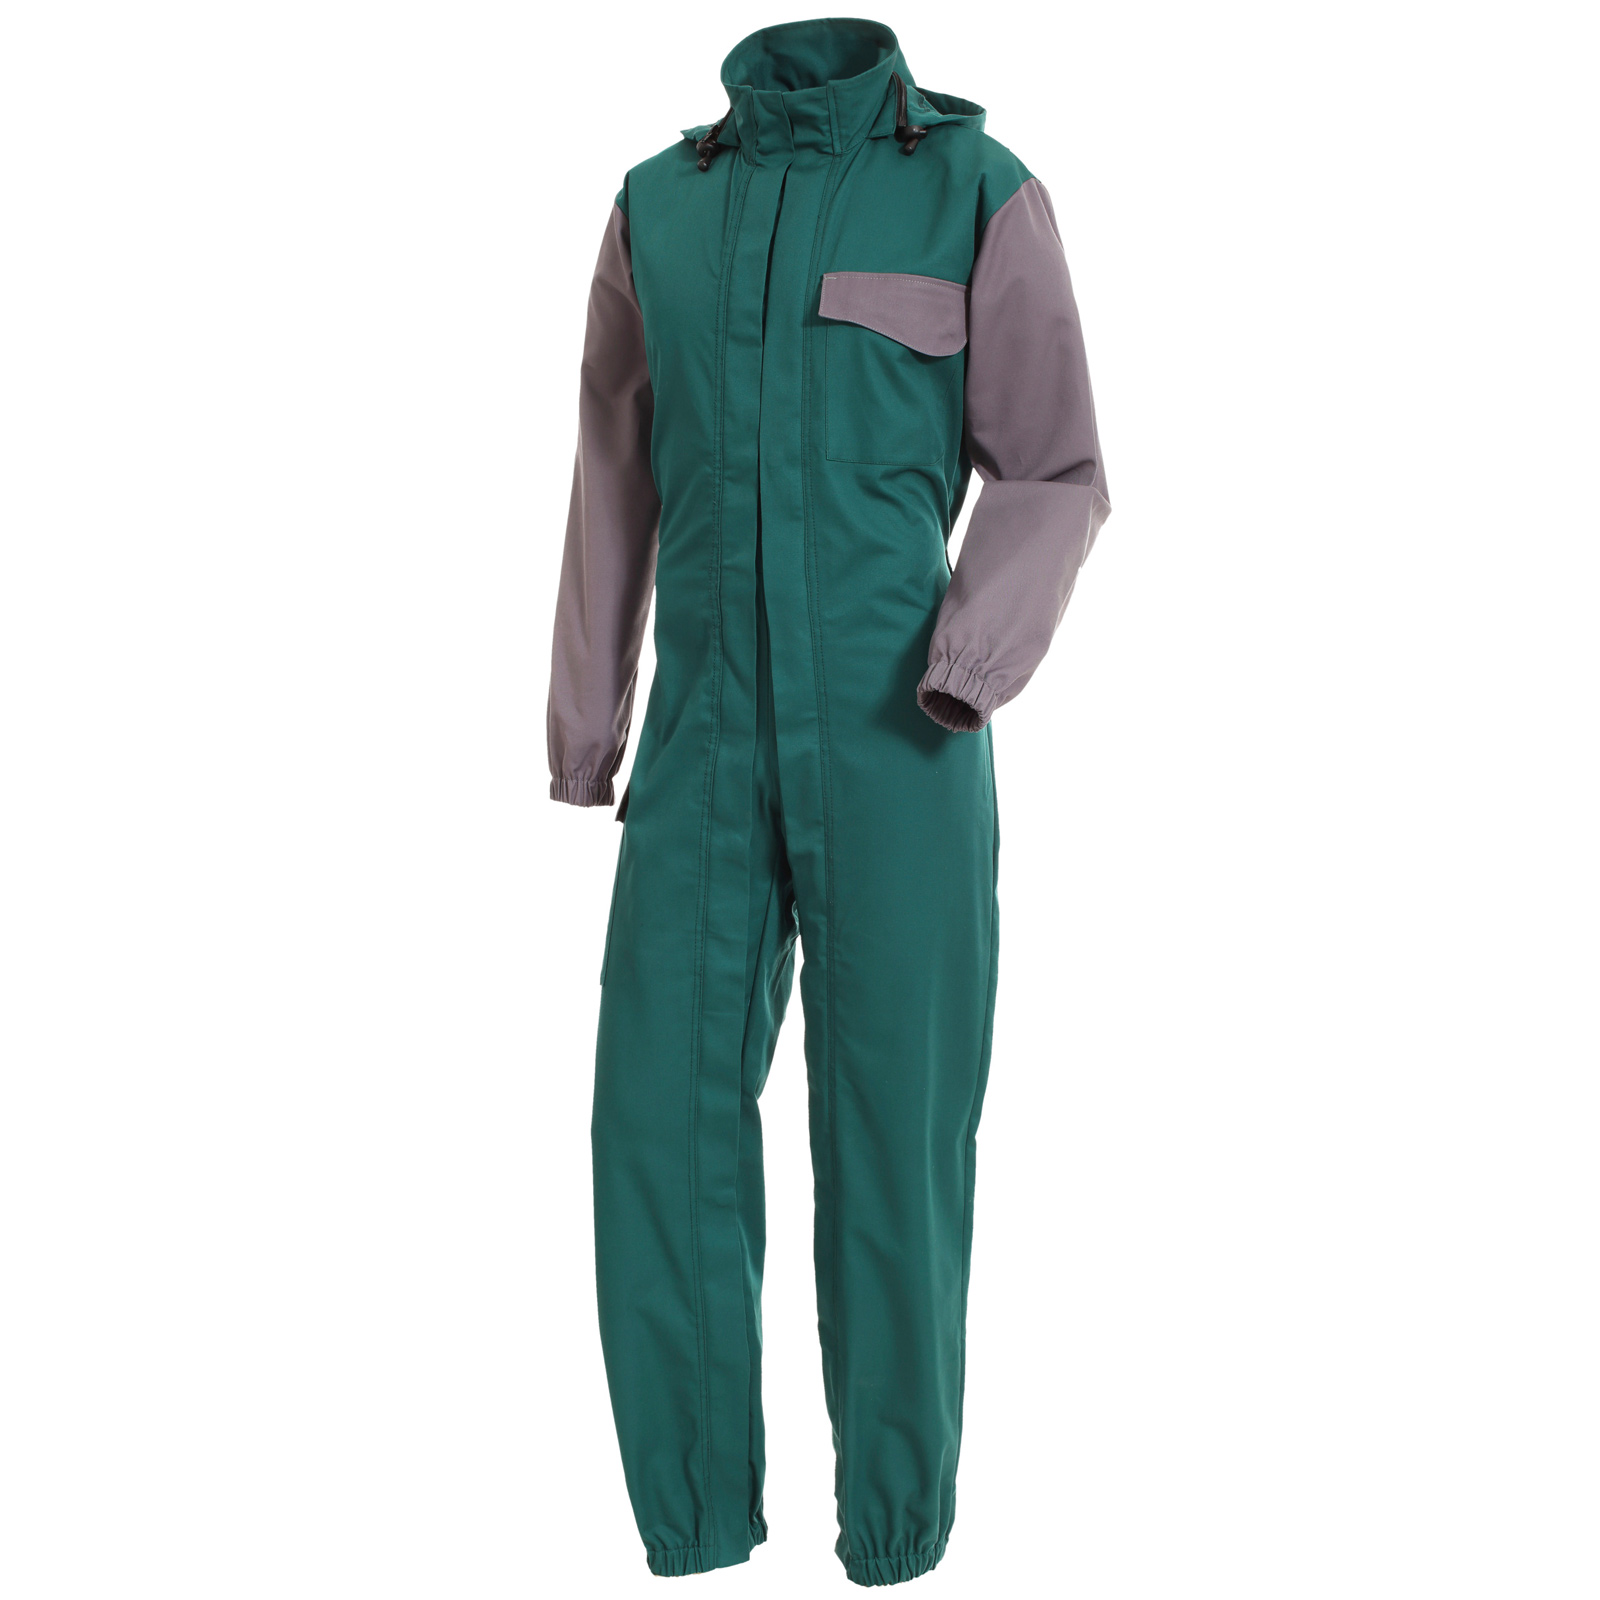 Plant protection overall Aegis green-grey L